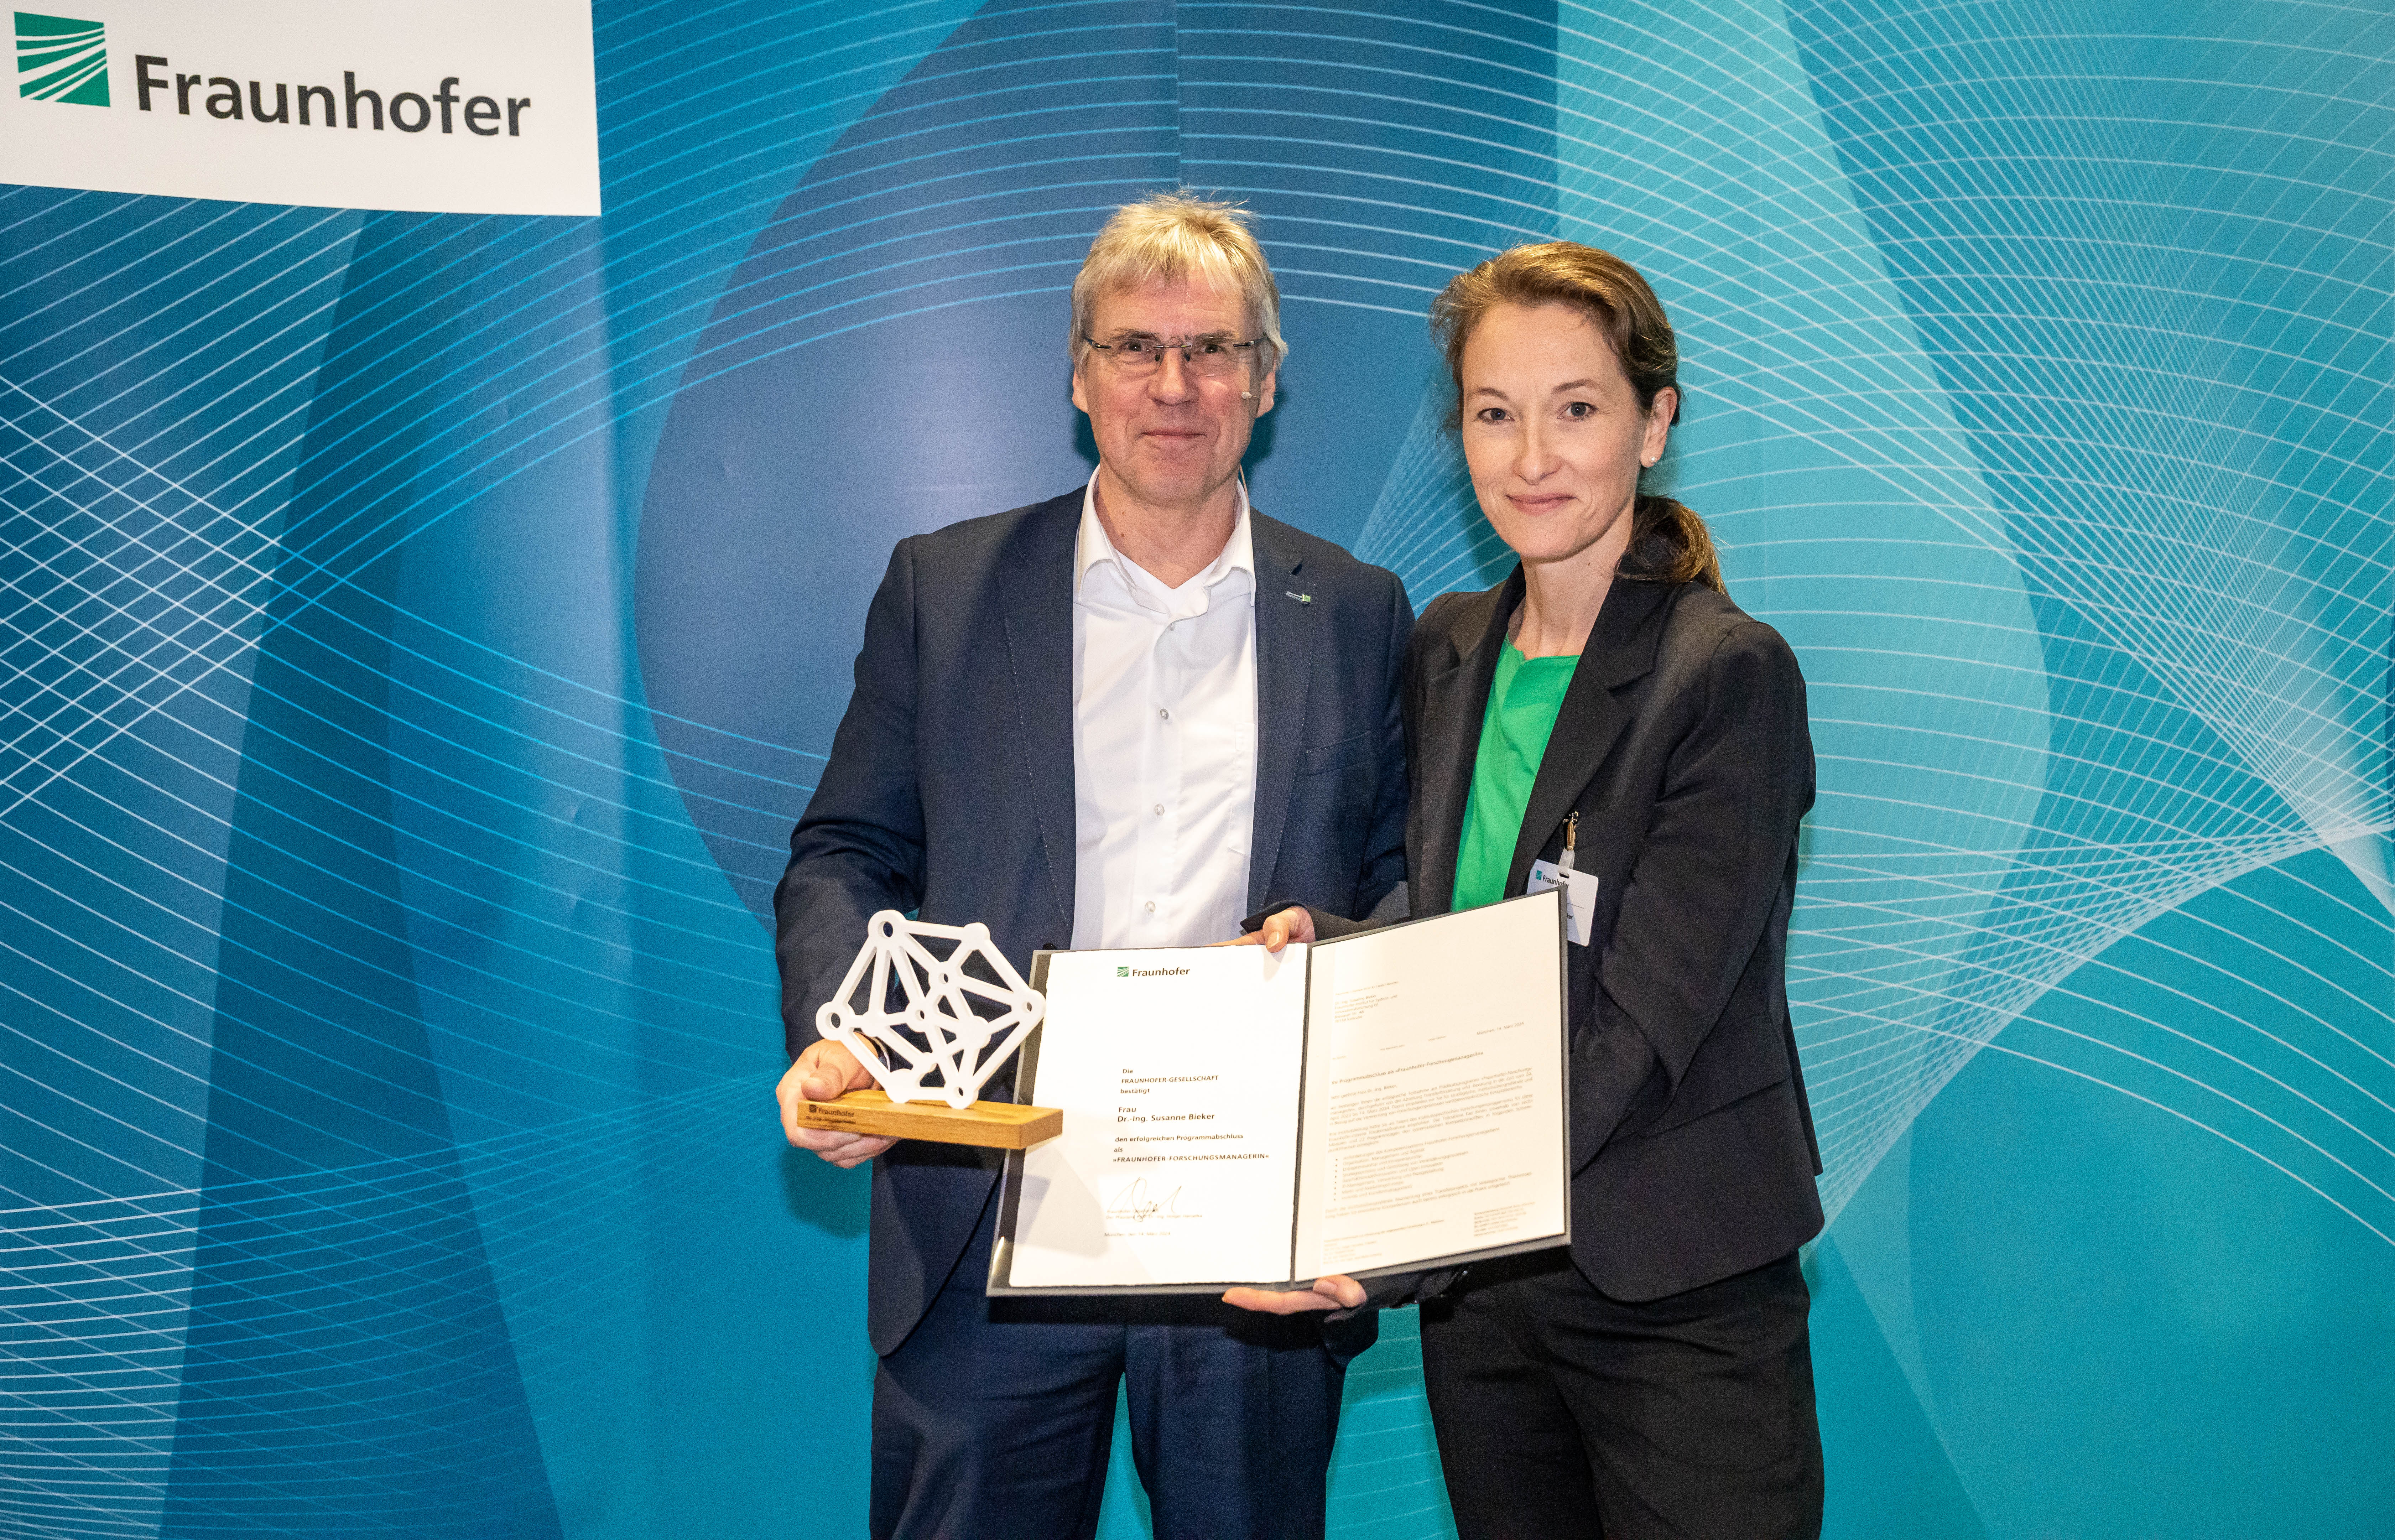 Fraunhofer President Prof.  Hanselka presented Dr. Bieker with the certificate and statue of the Forschungsmanager (Research Management) Program.